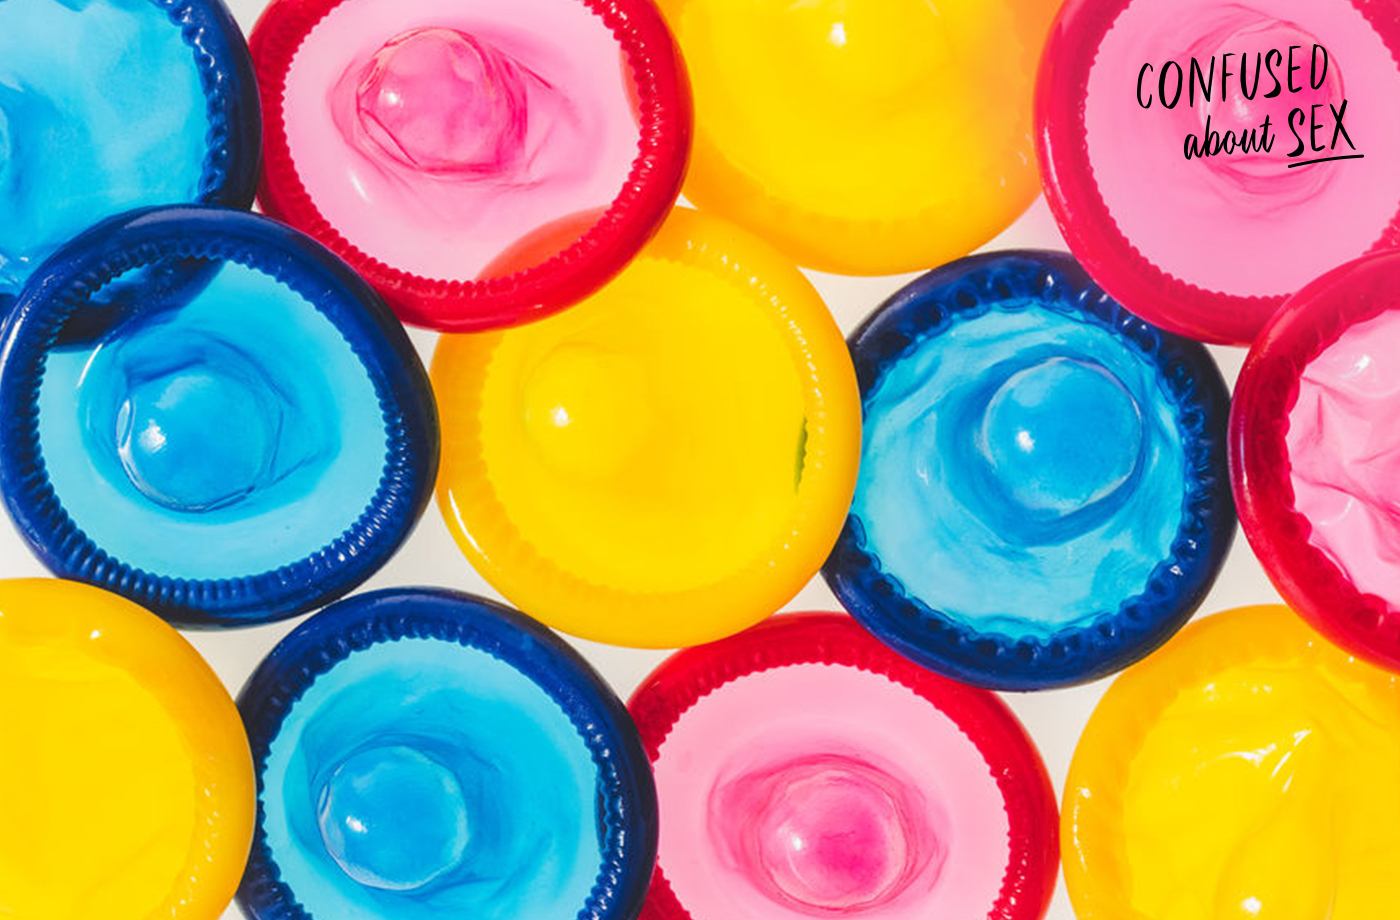 Do condoms prevent STDs and STIs? Not always, say pros